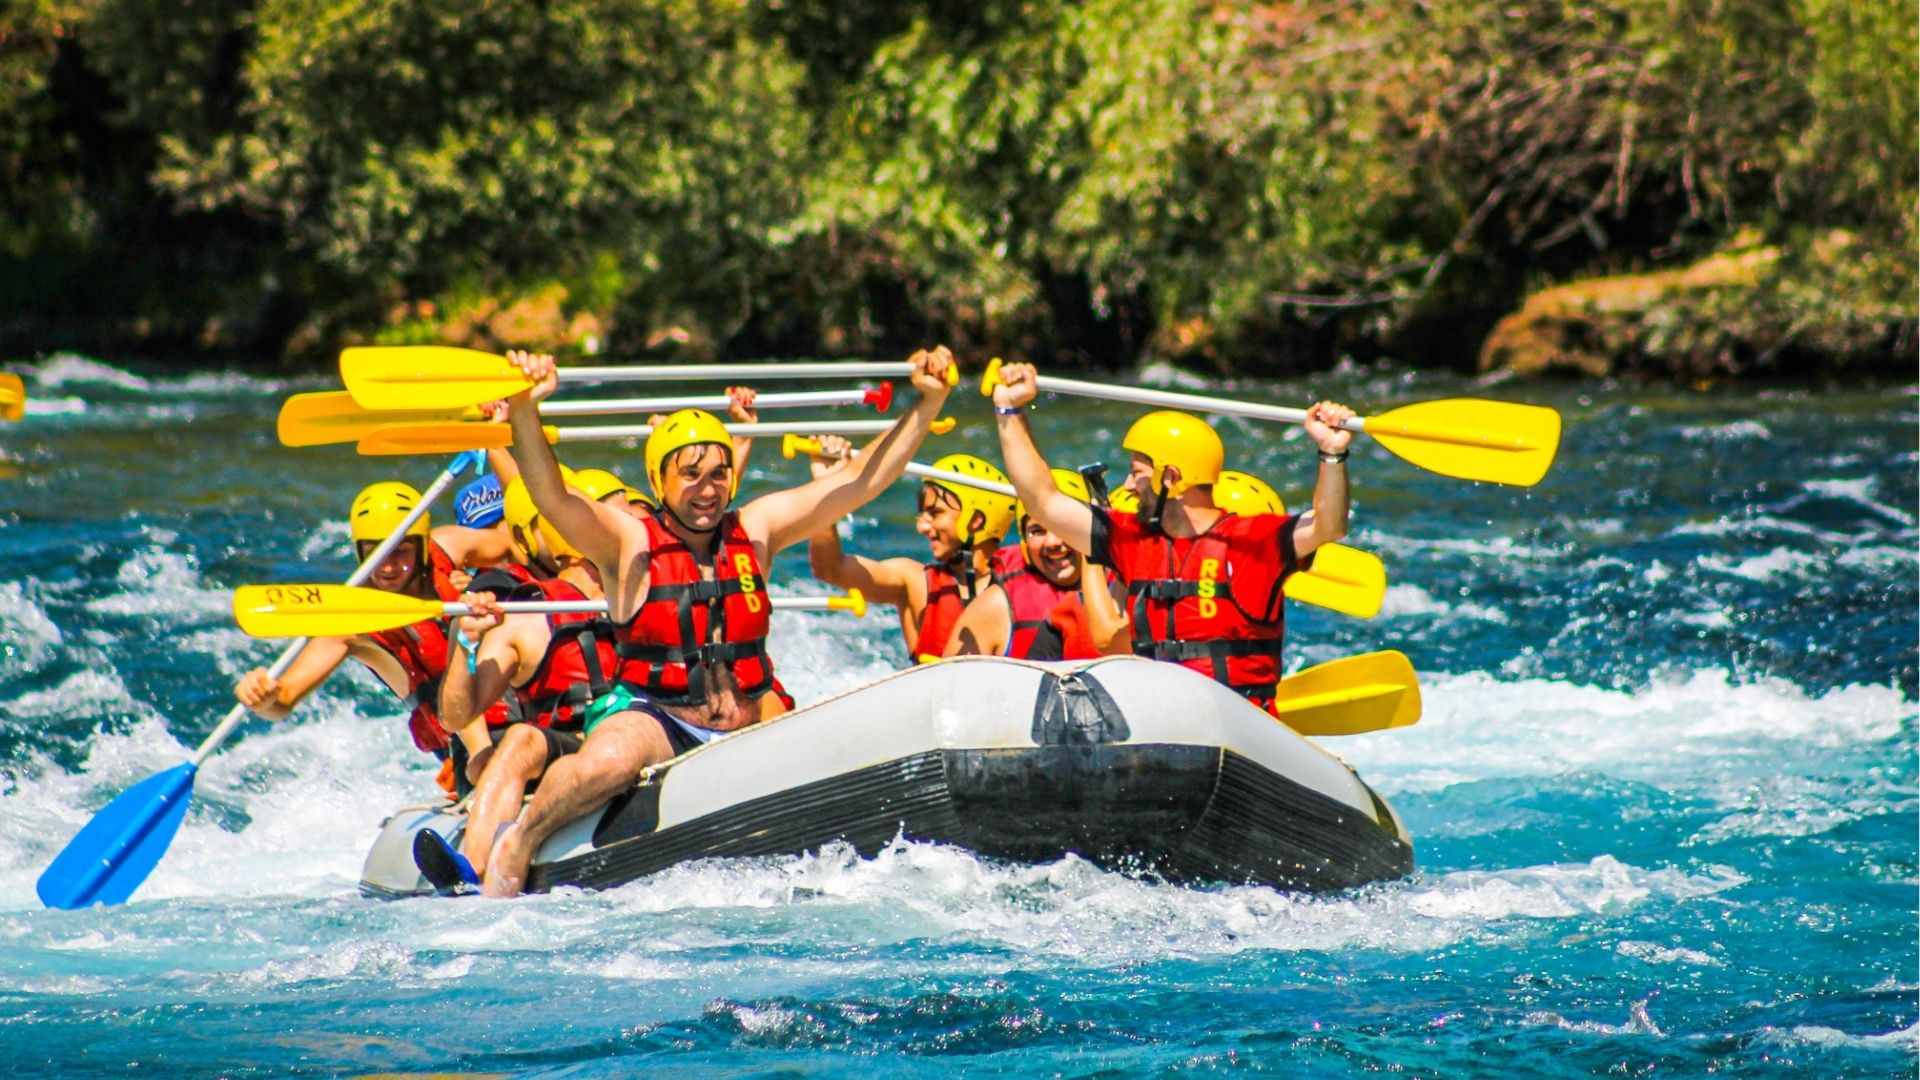 Rafting Experience on the Balsa River